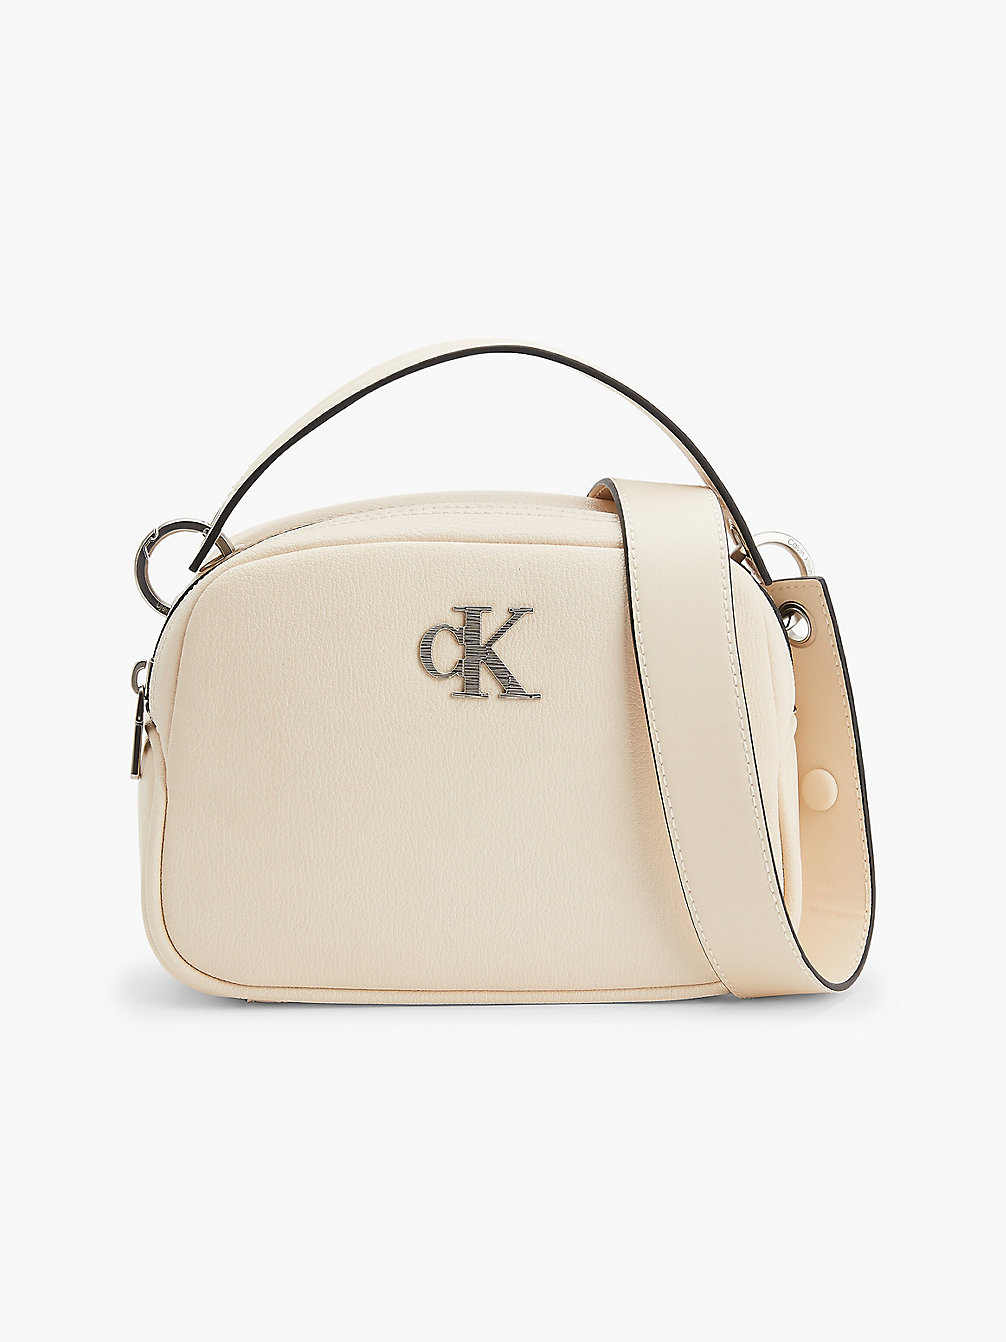 TUSCAN BEIGE Recycled Crossbody Bag undefined women Calvin Klein